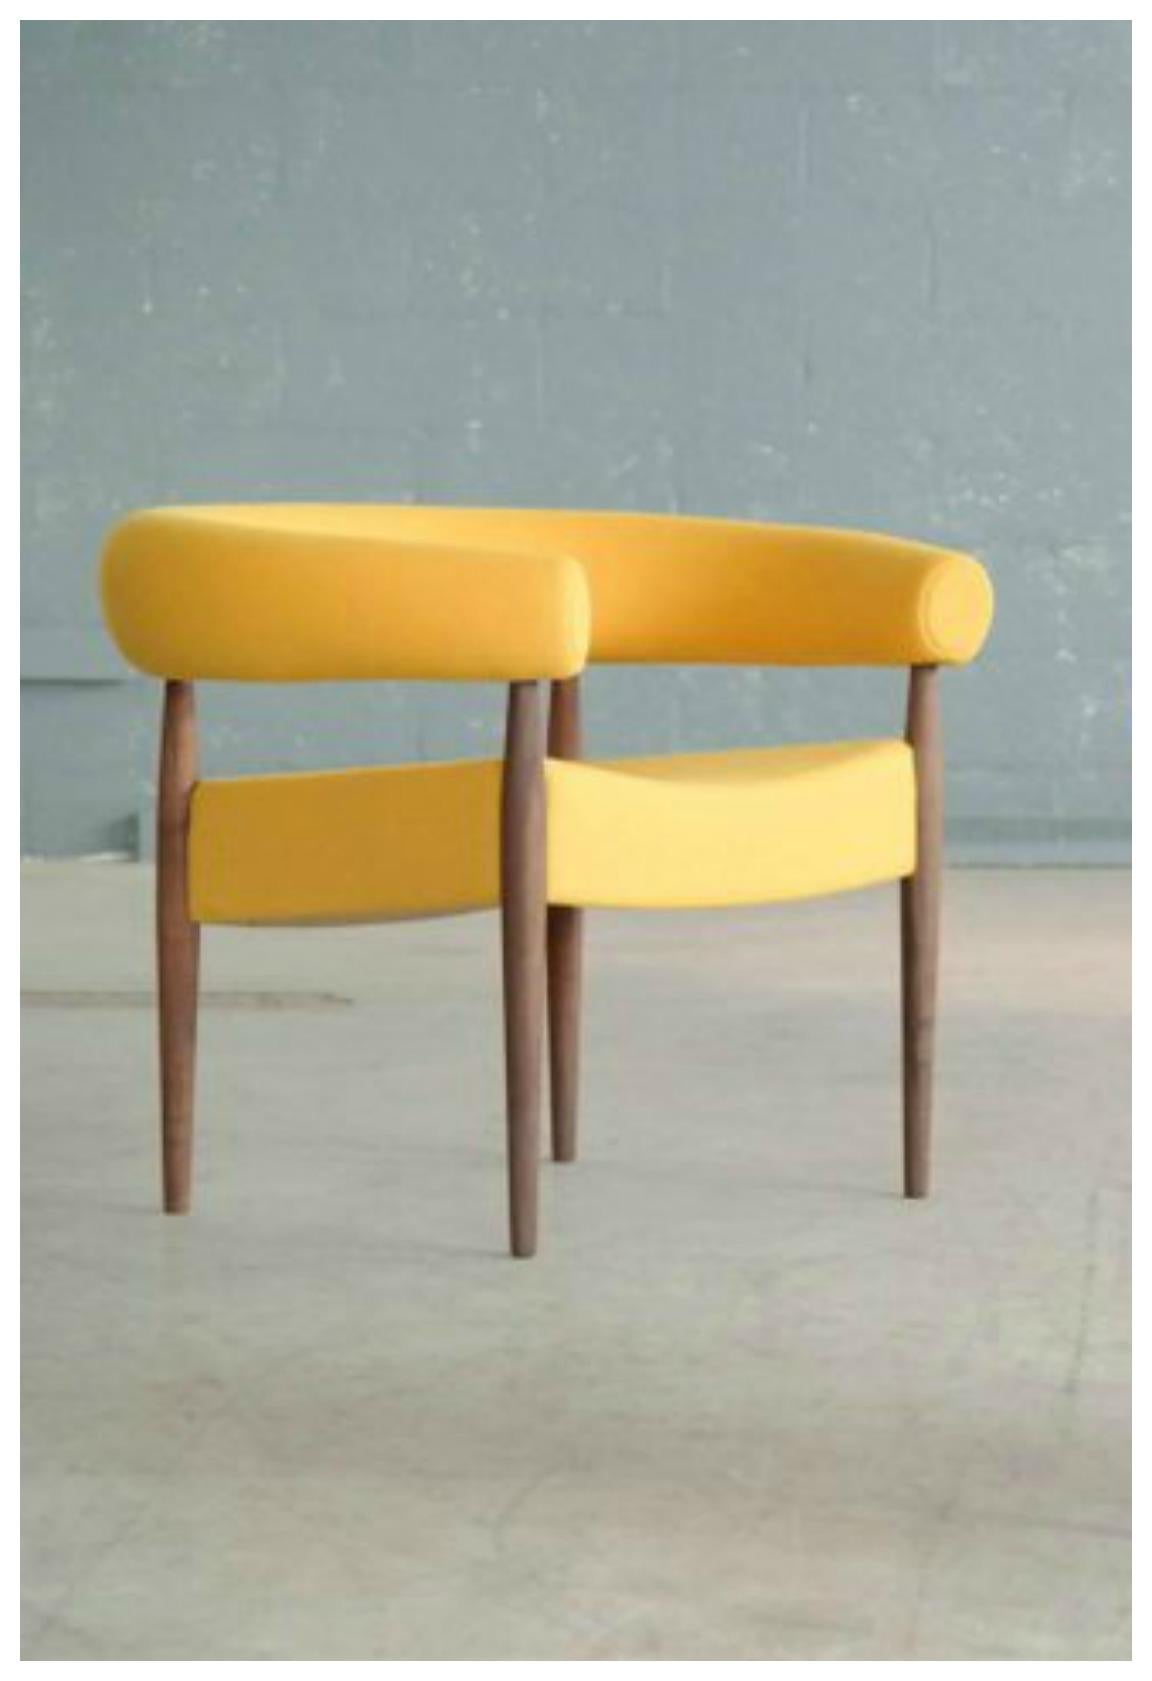 New production of Nanna and Jorgen Ditzel's ring chair manufactured by GETAMA. GETAMA had a long relationship with Nanna Ditzel, often called the 